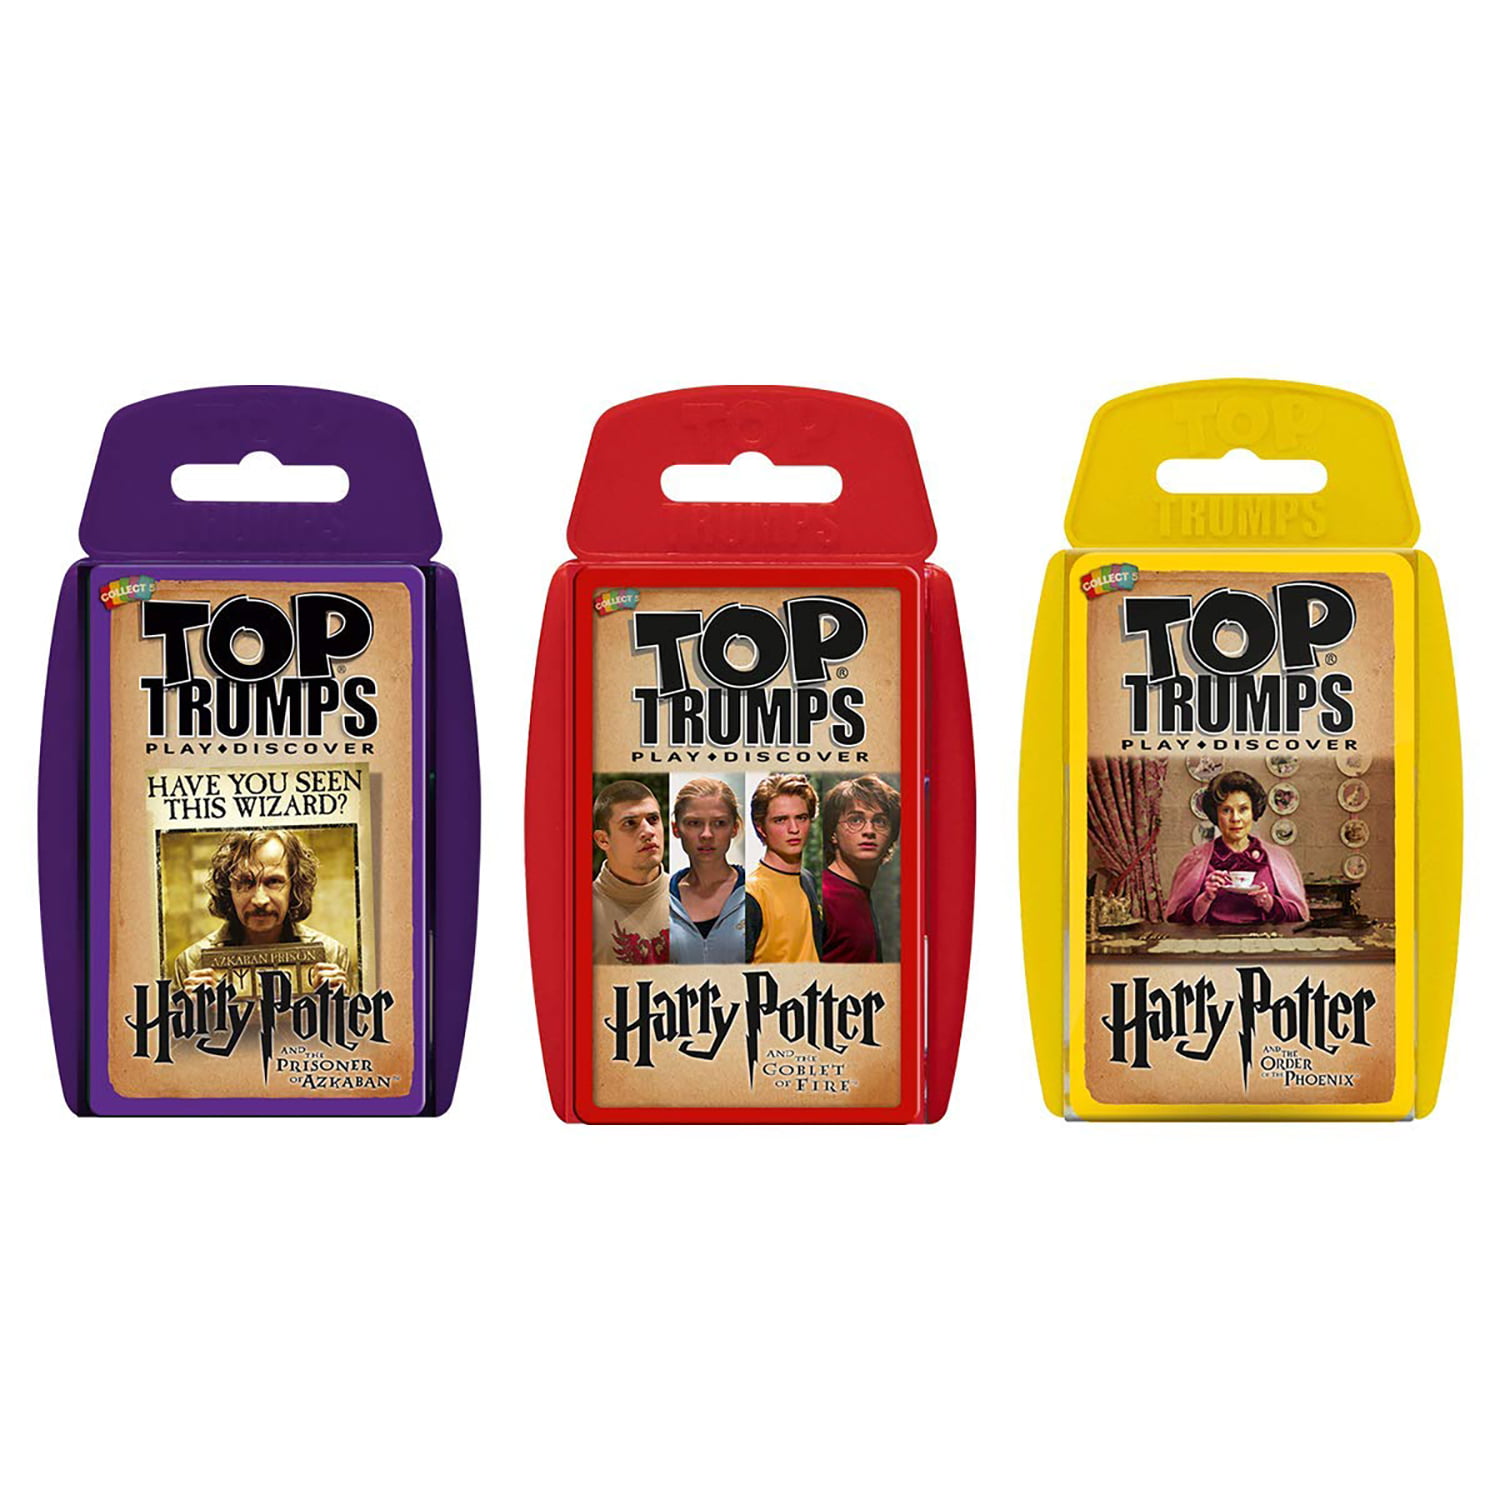 Top Trumps Harry Potter And The Deathly Hallows Part 2 Educational Fun Card Game 